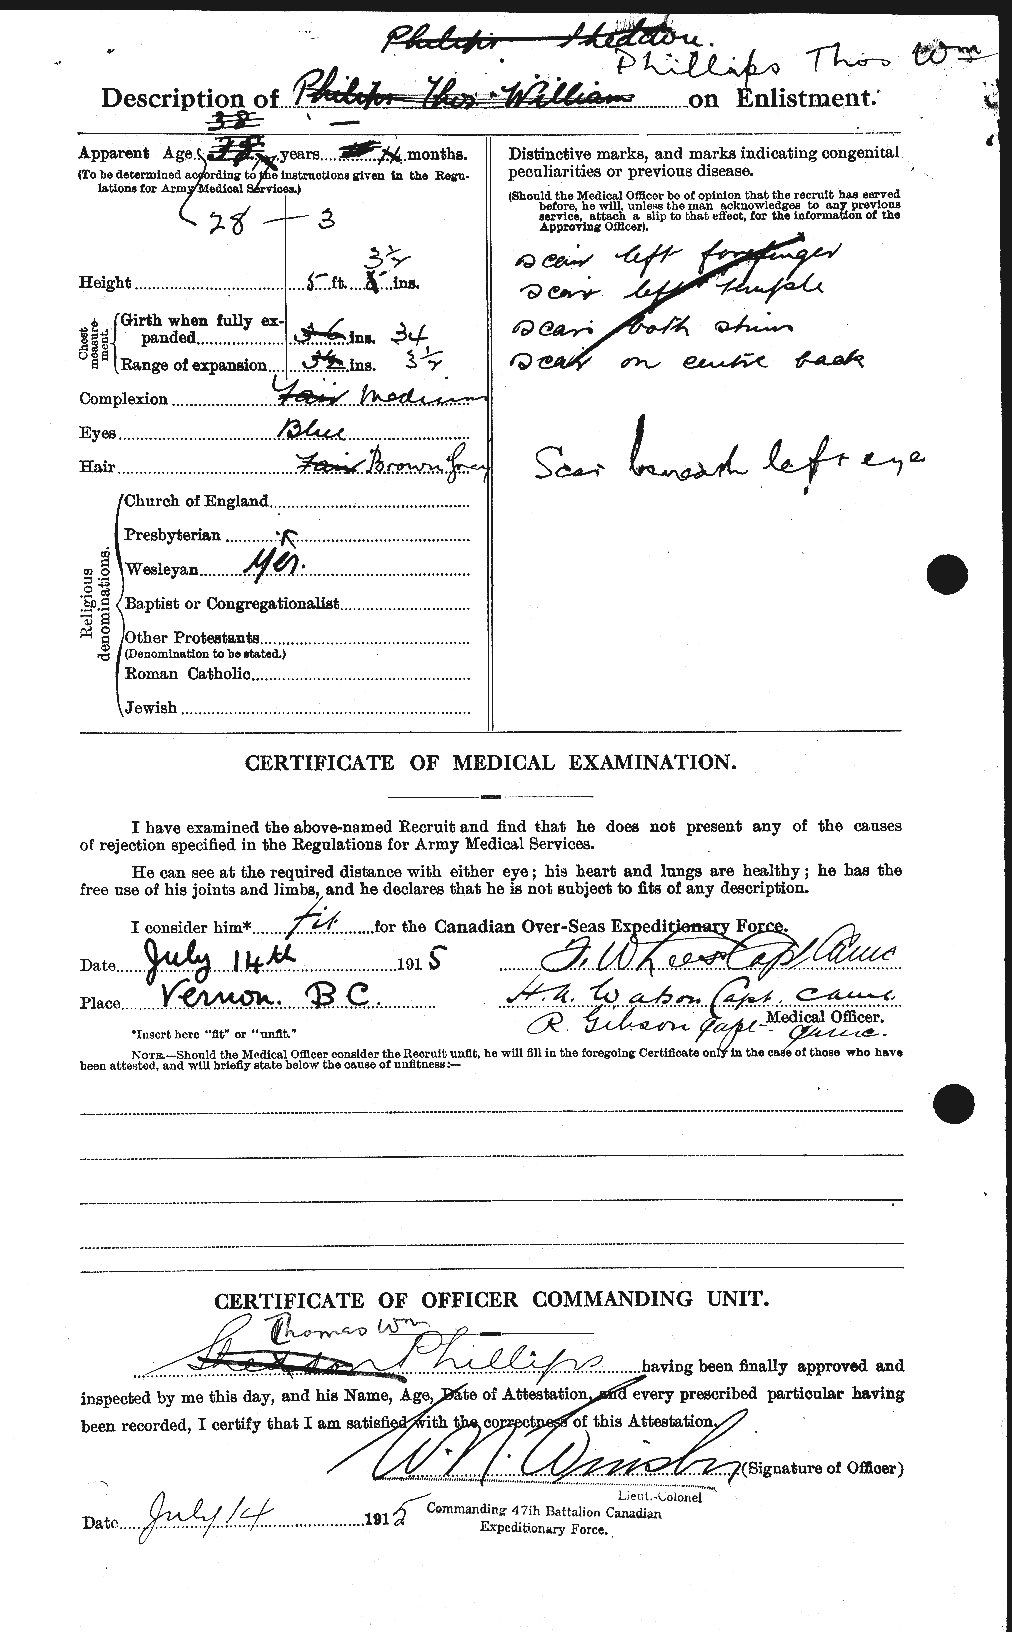 Personnel Records of the First World War - CEF 577913b